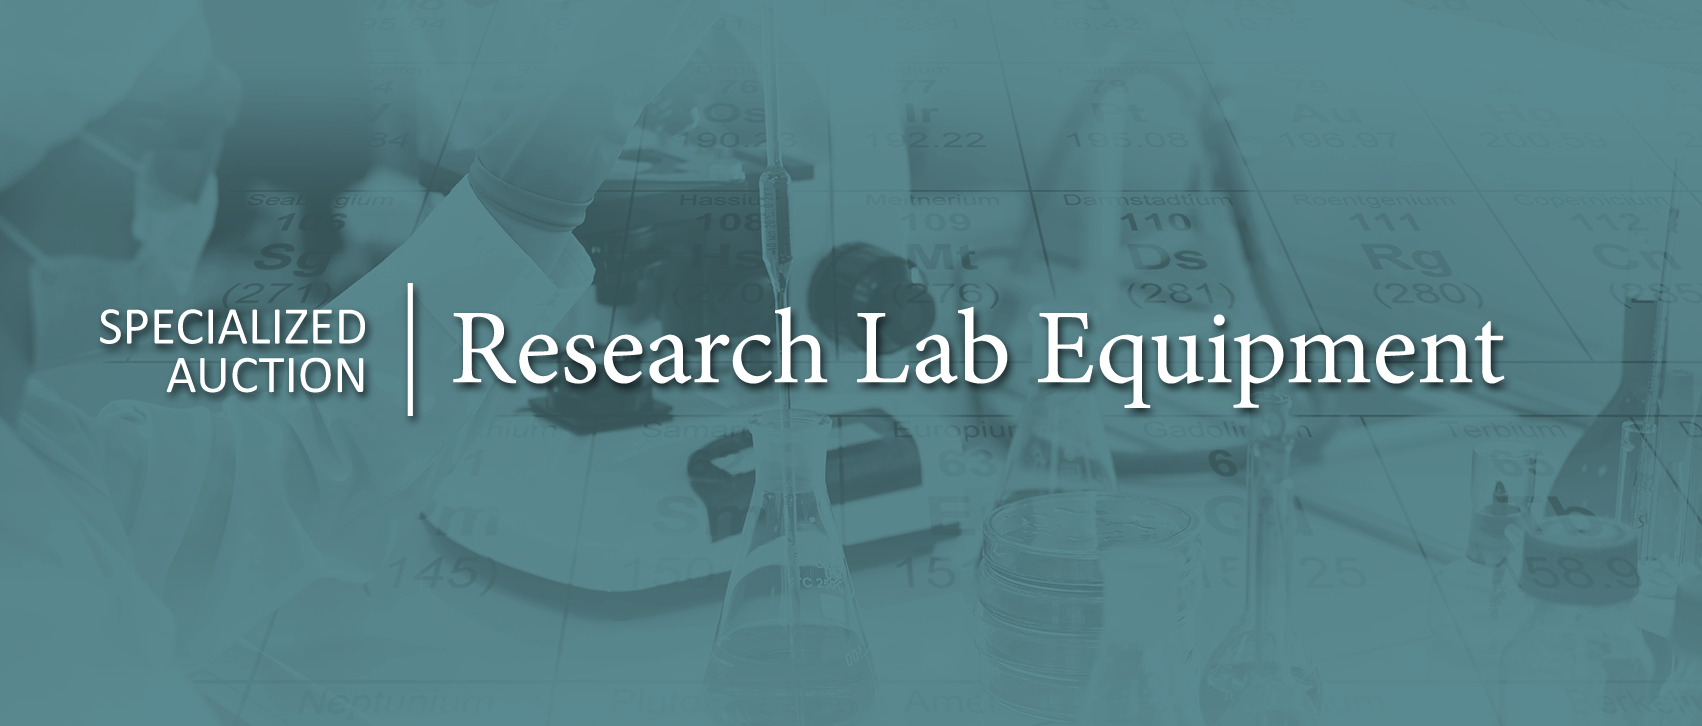 Medical Equipment Auction, Research Lab Equipment Auction